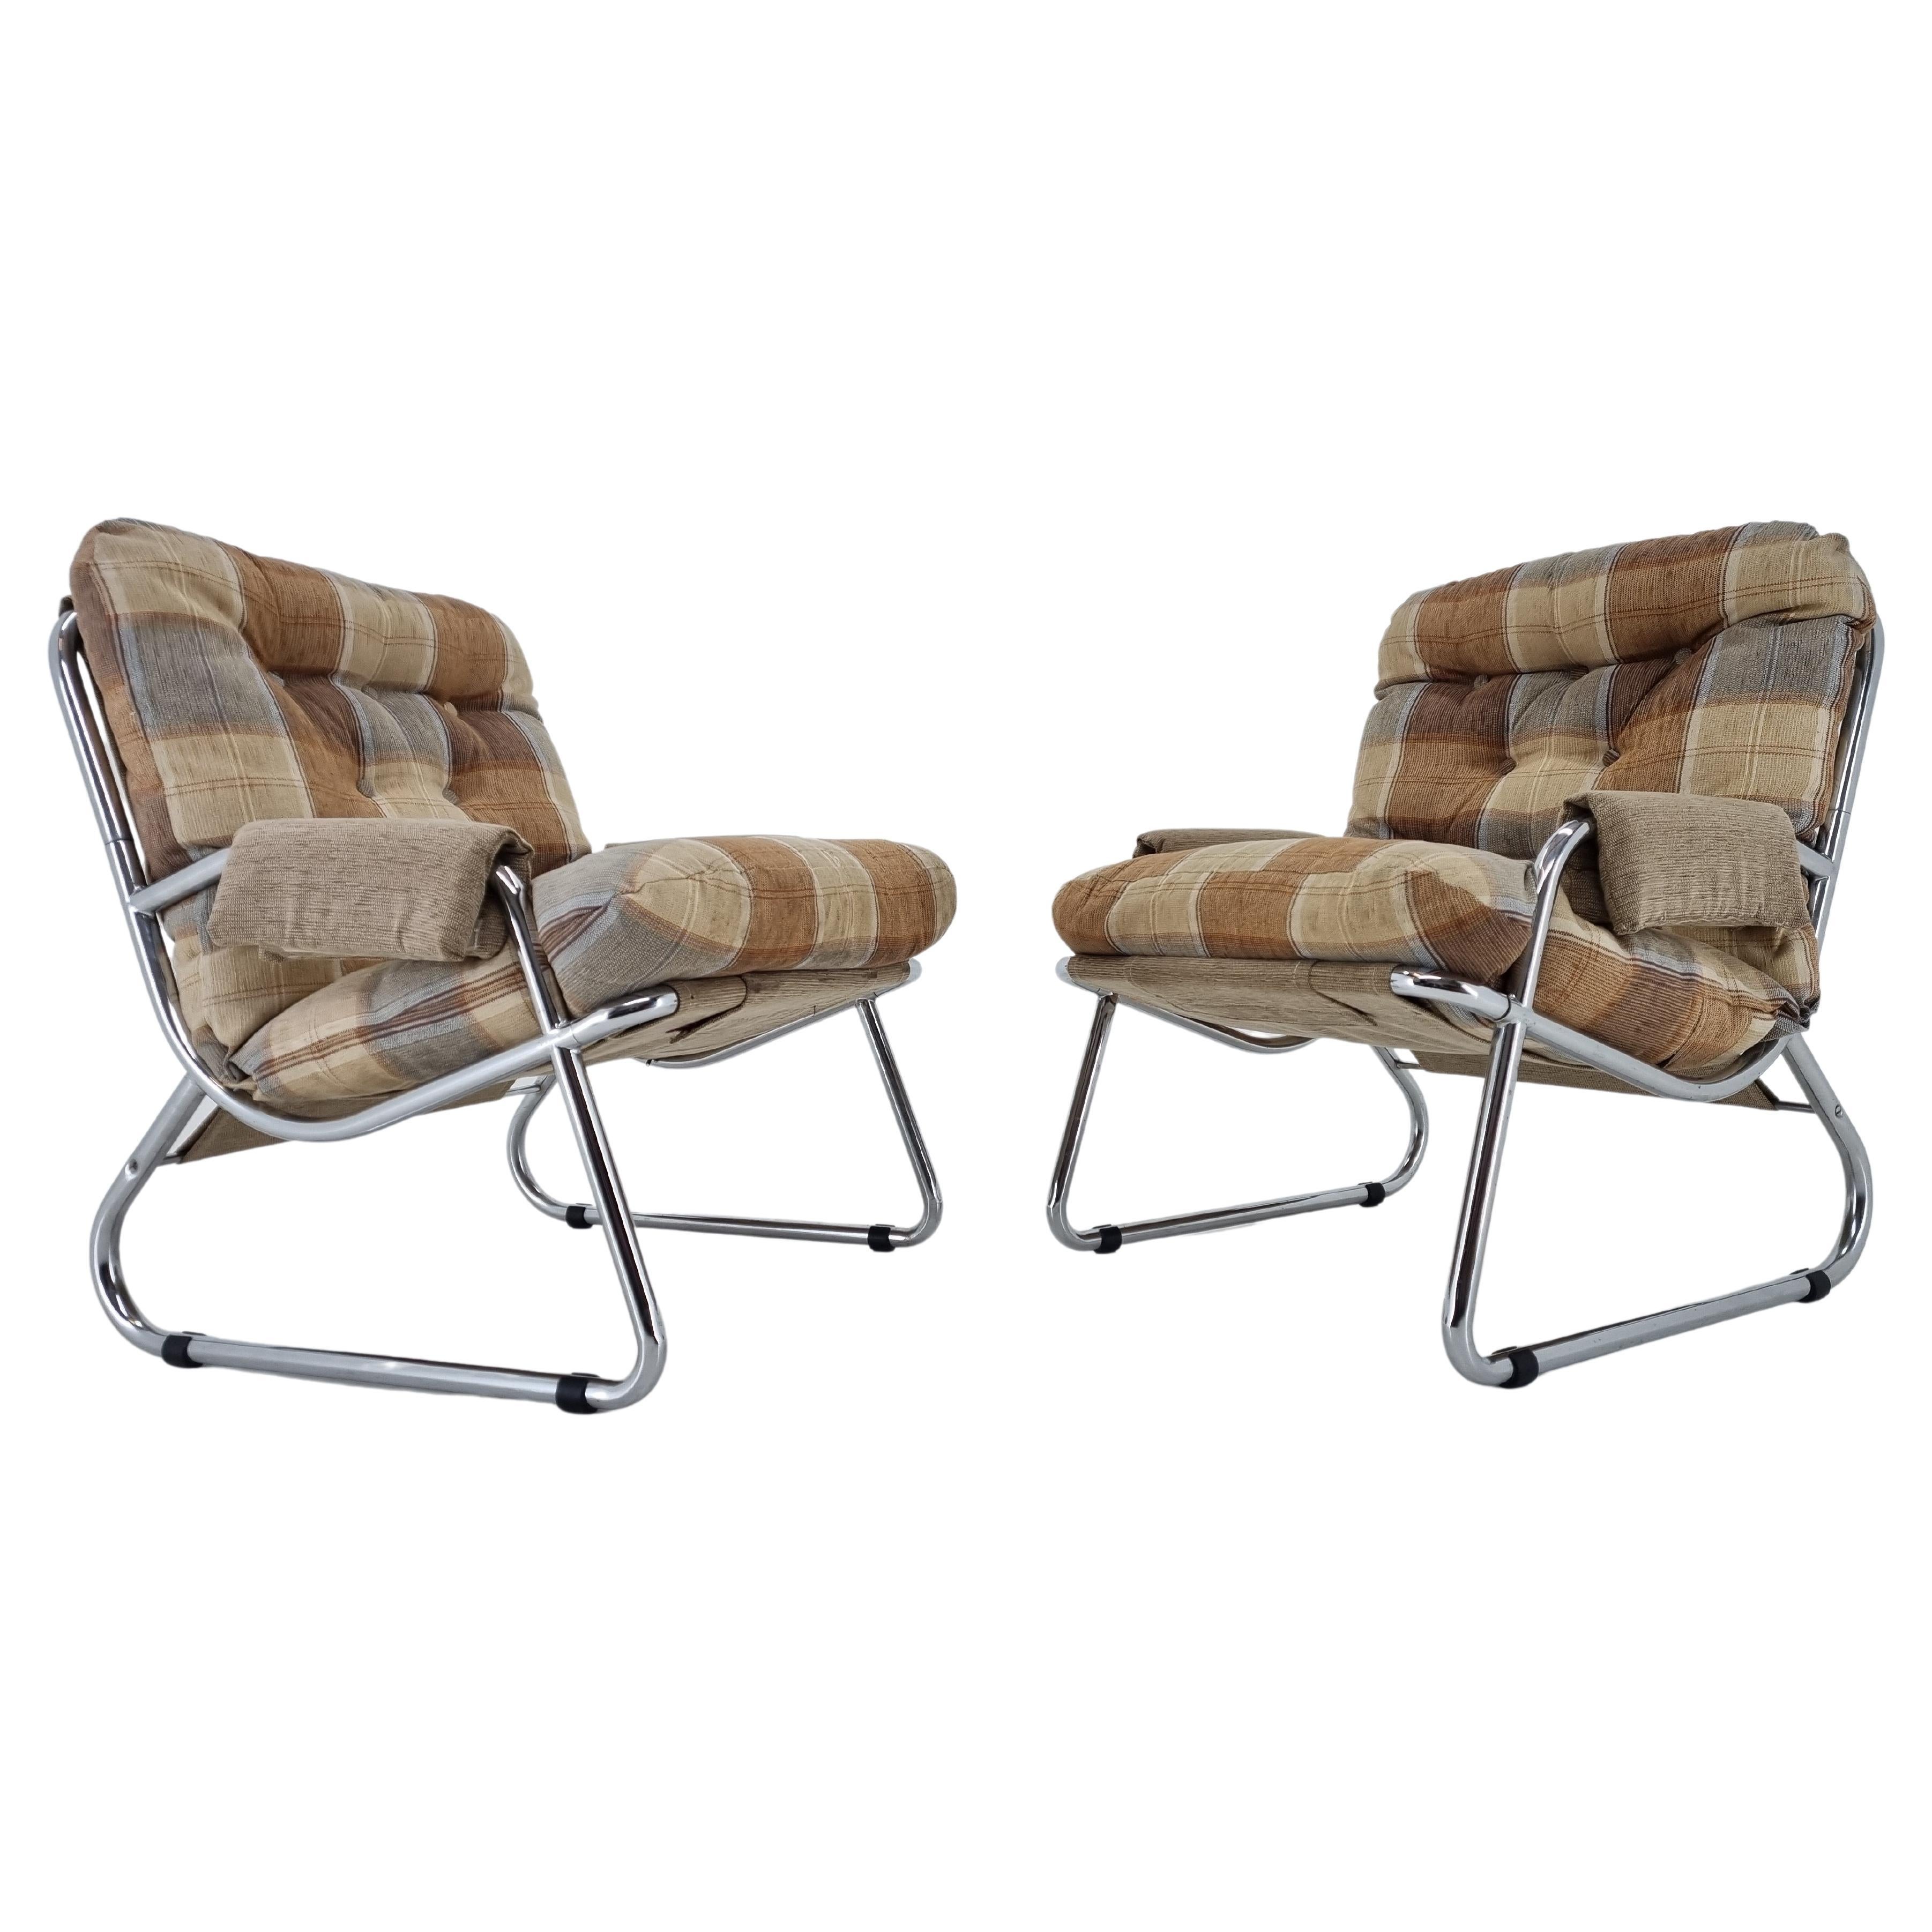 Pair of Mid Century Armchairs, Peter Hoyte, 1970s